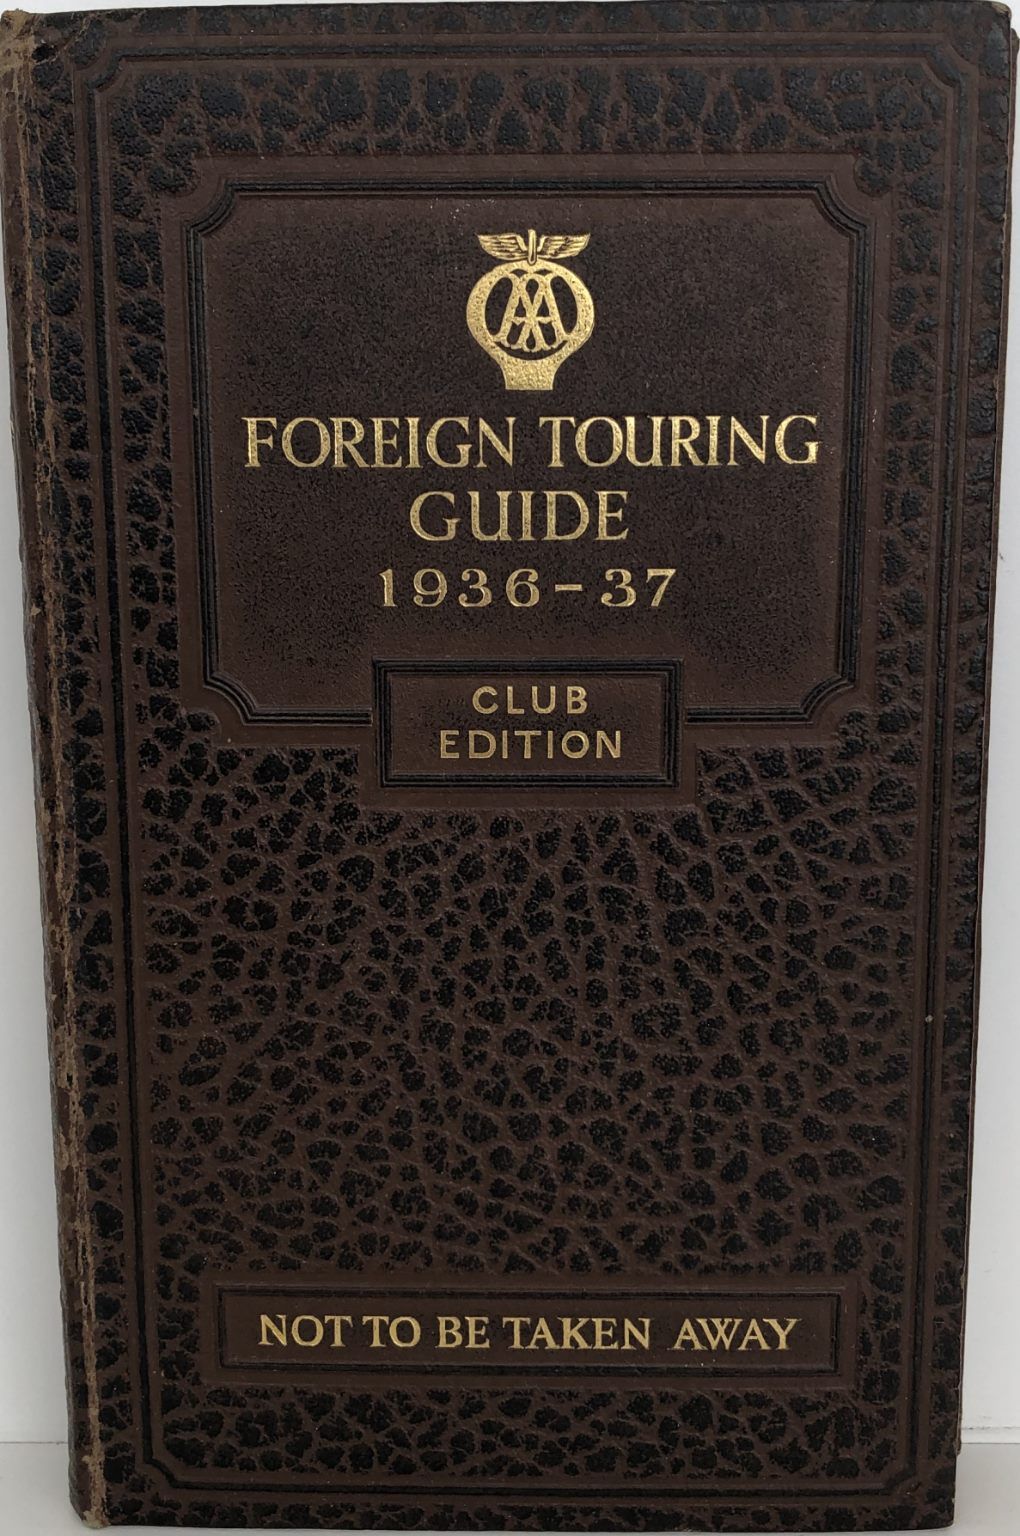 FOREIGN TOURING GUIDE 1936-37: The Automobile Association